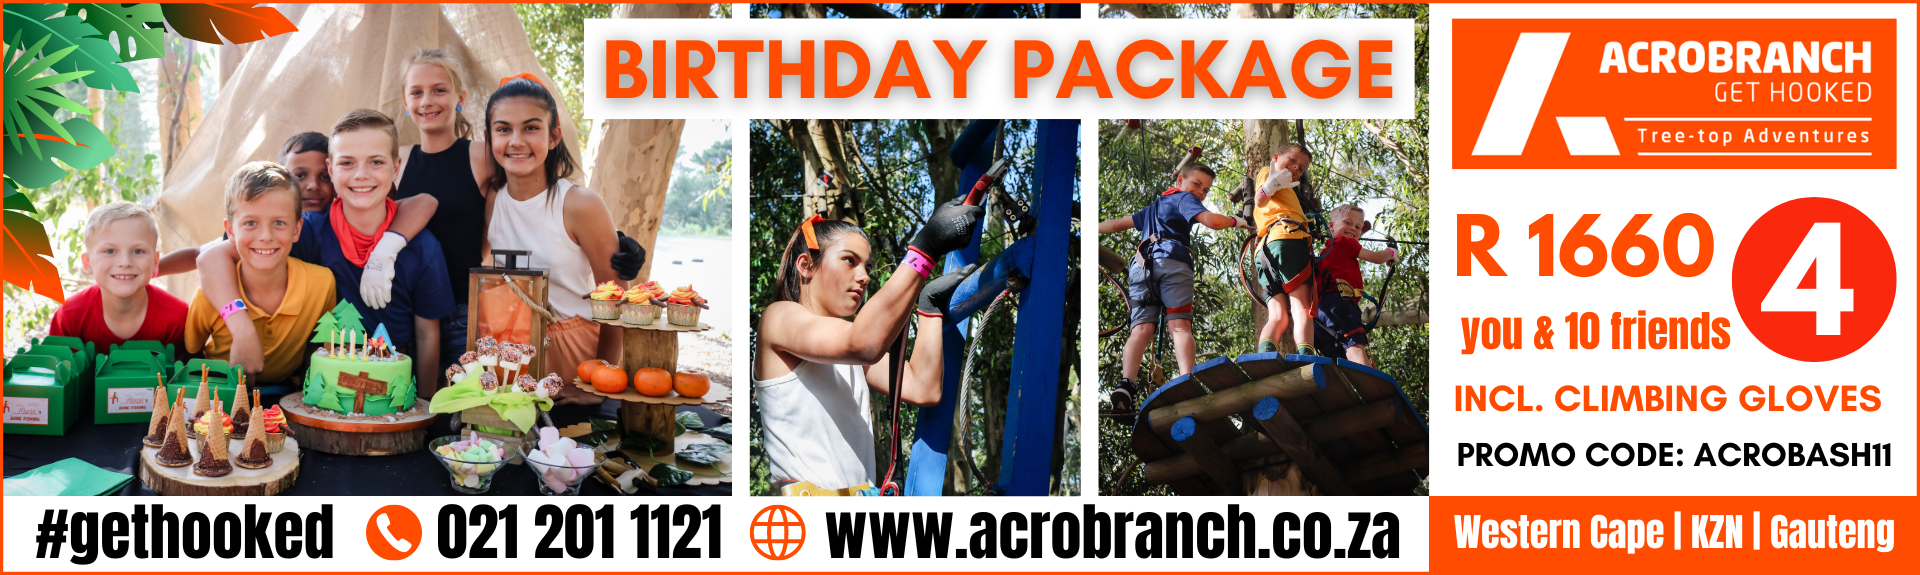 Acrobranch discount voucher | Things to do With Kids